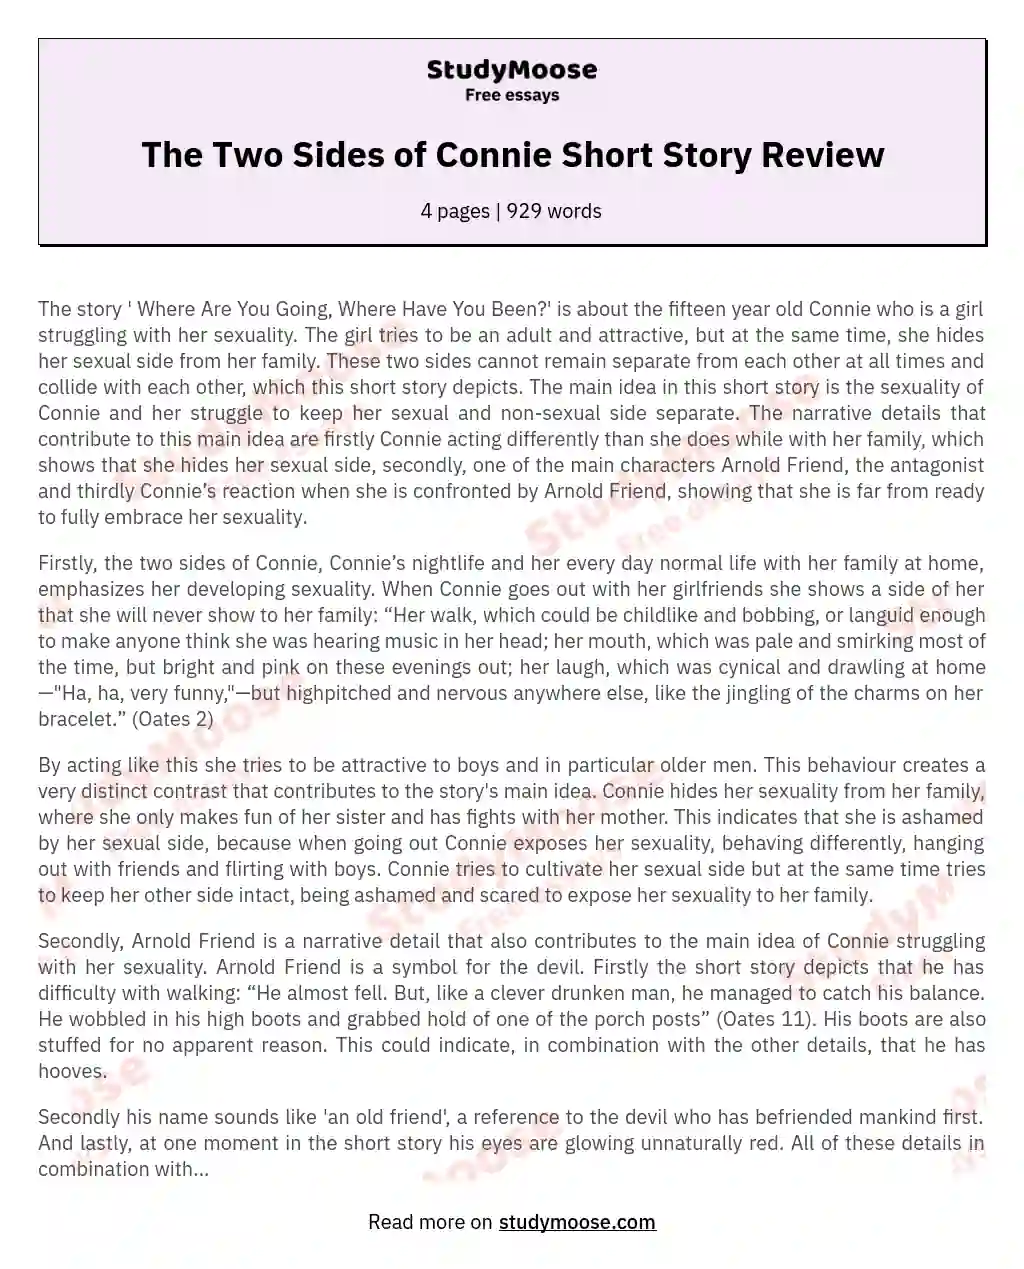 The Two Sides of Connie Short Story Review essay